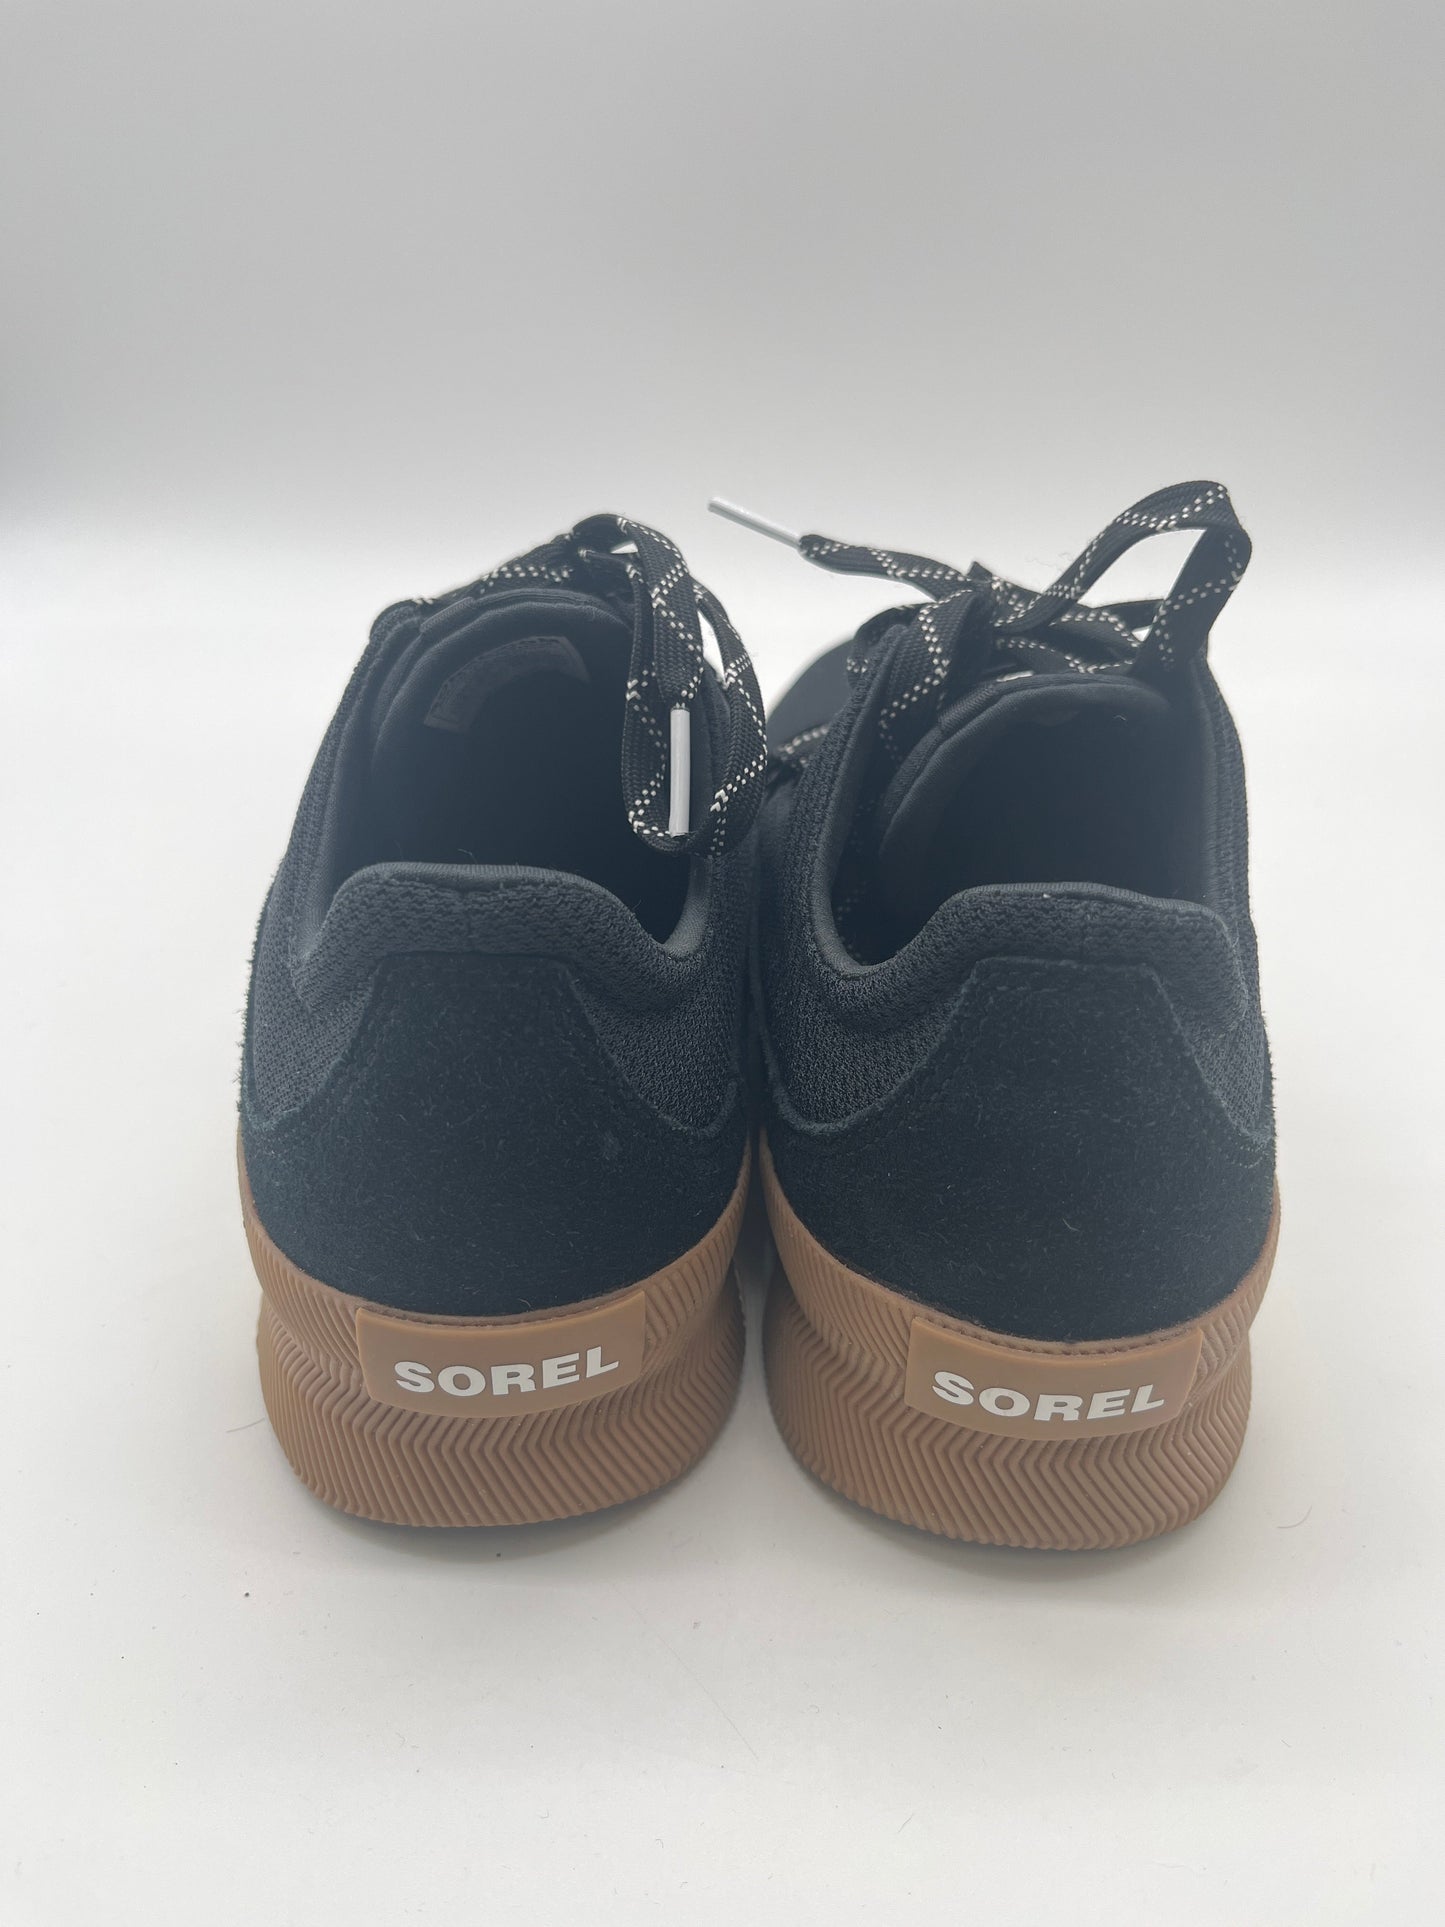 Shoes Sneakers By Sorel  Size: 10.5